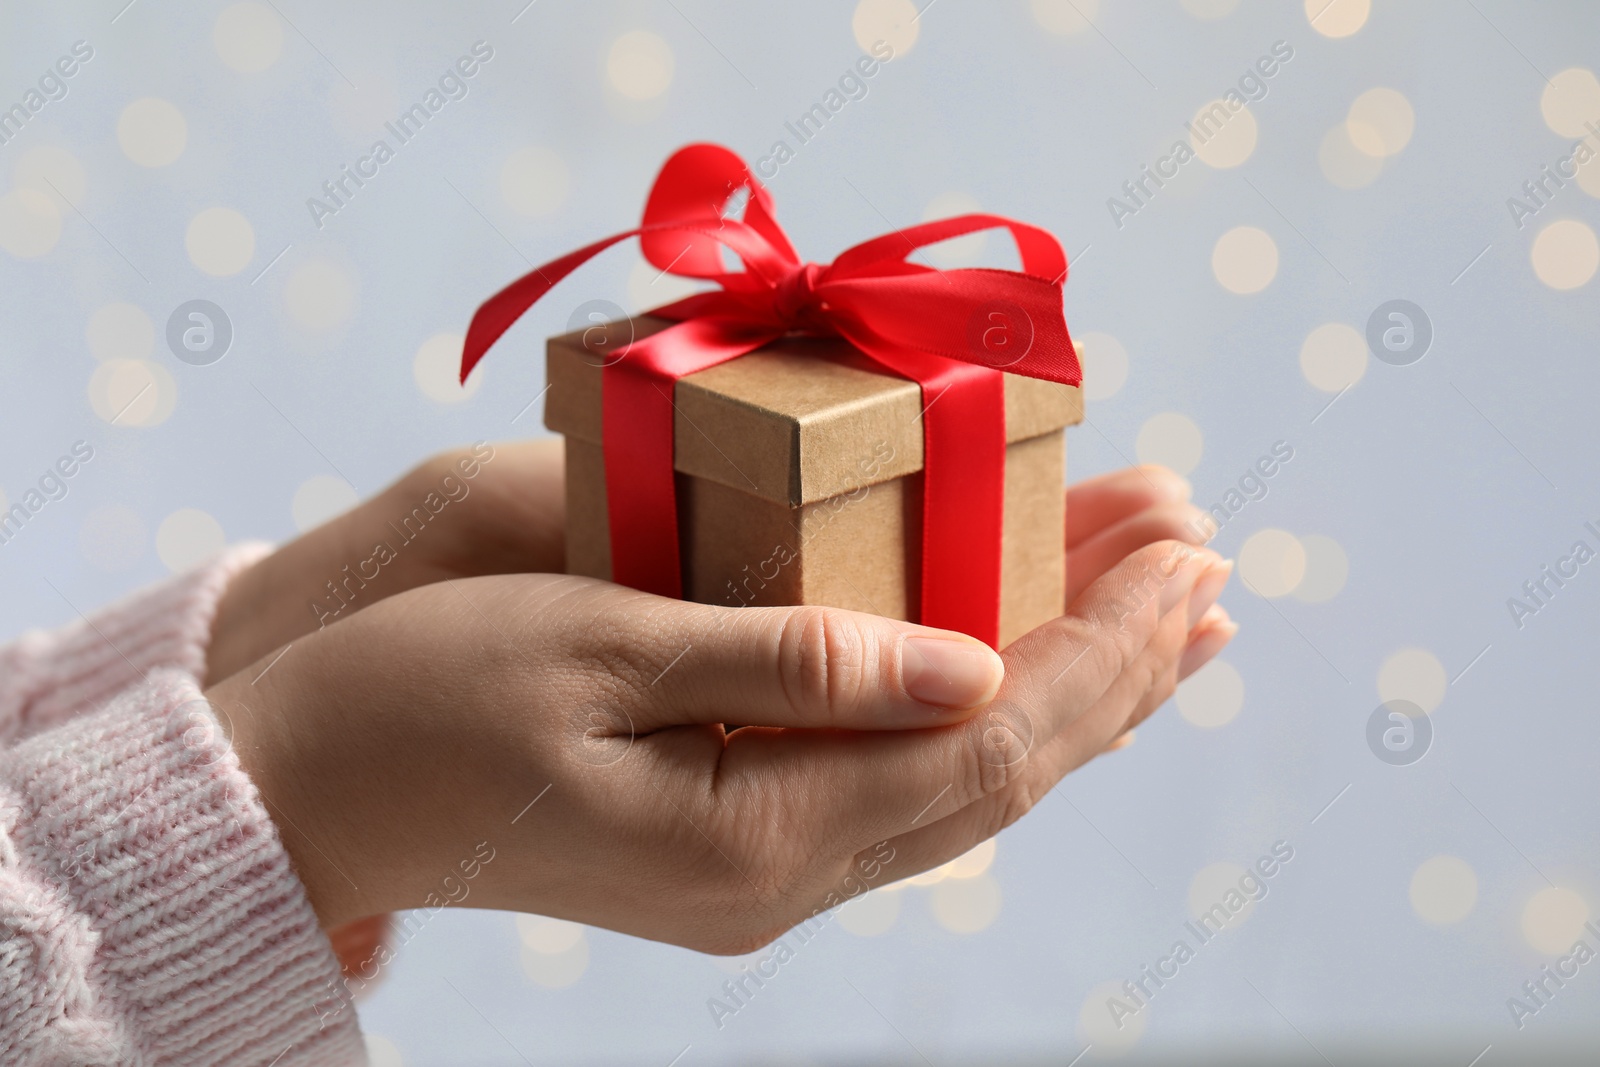 Photo of Woman holding gift box with red bow against blurred festive lights, closeup. Bokeh effect